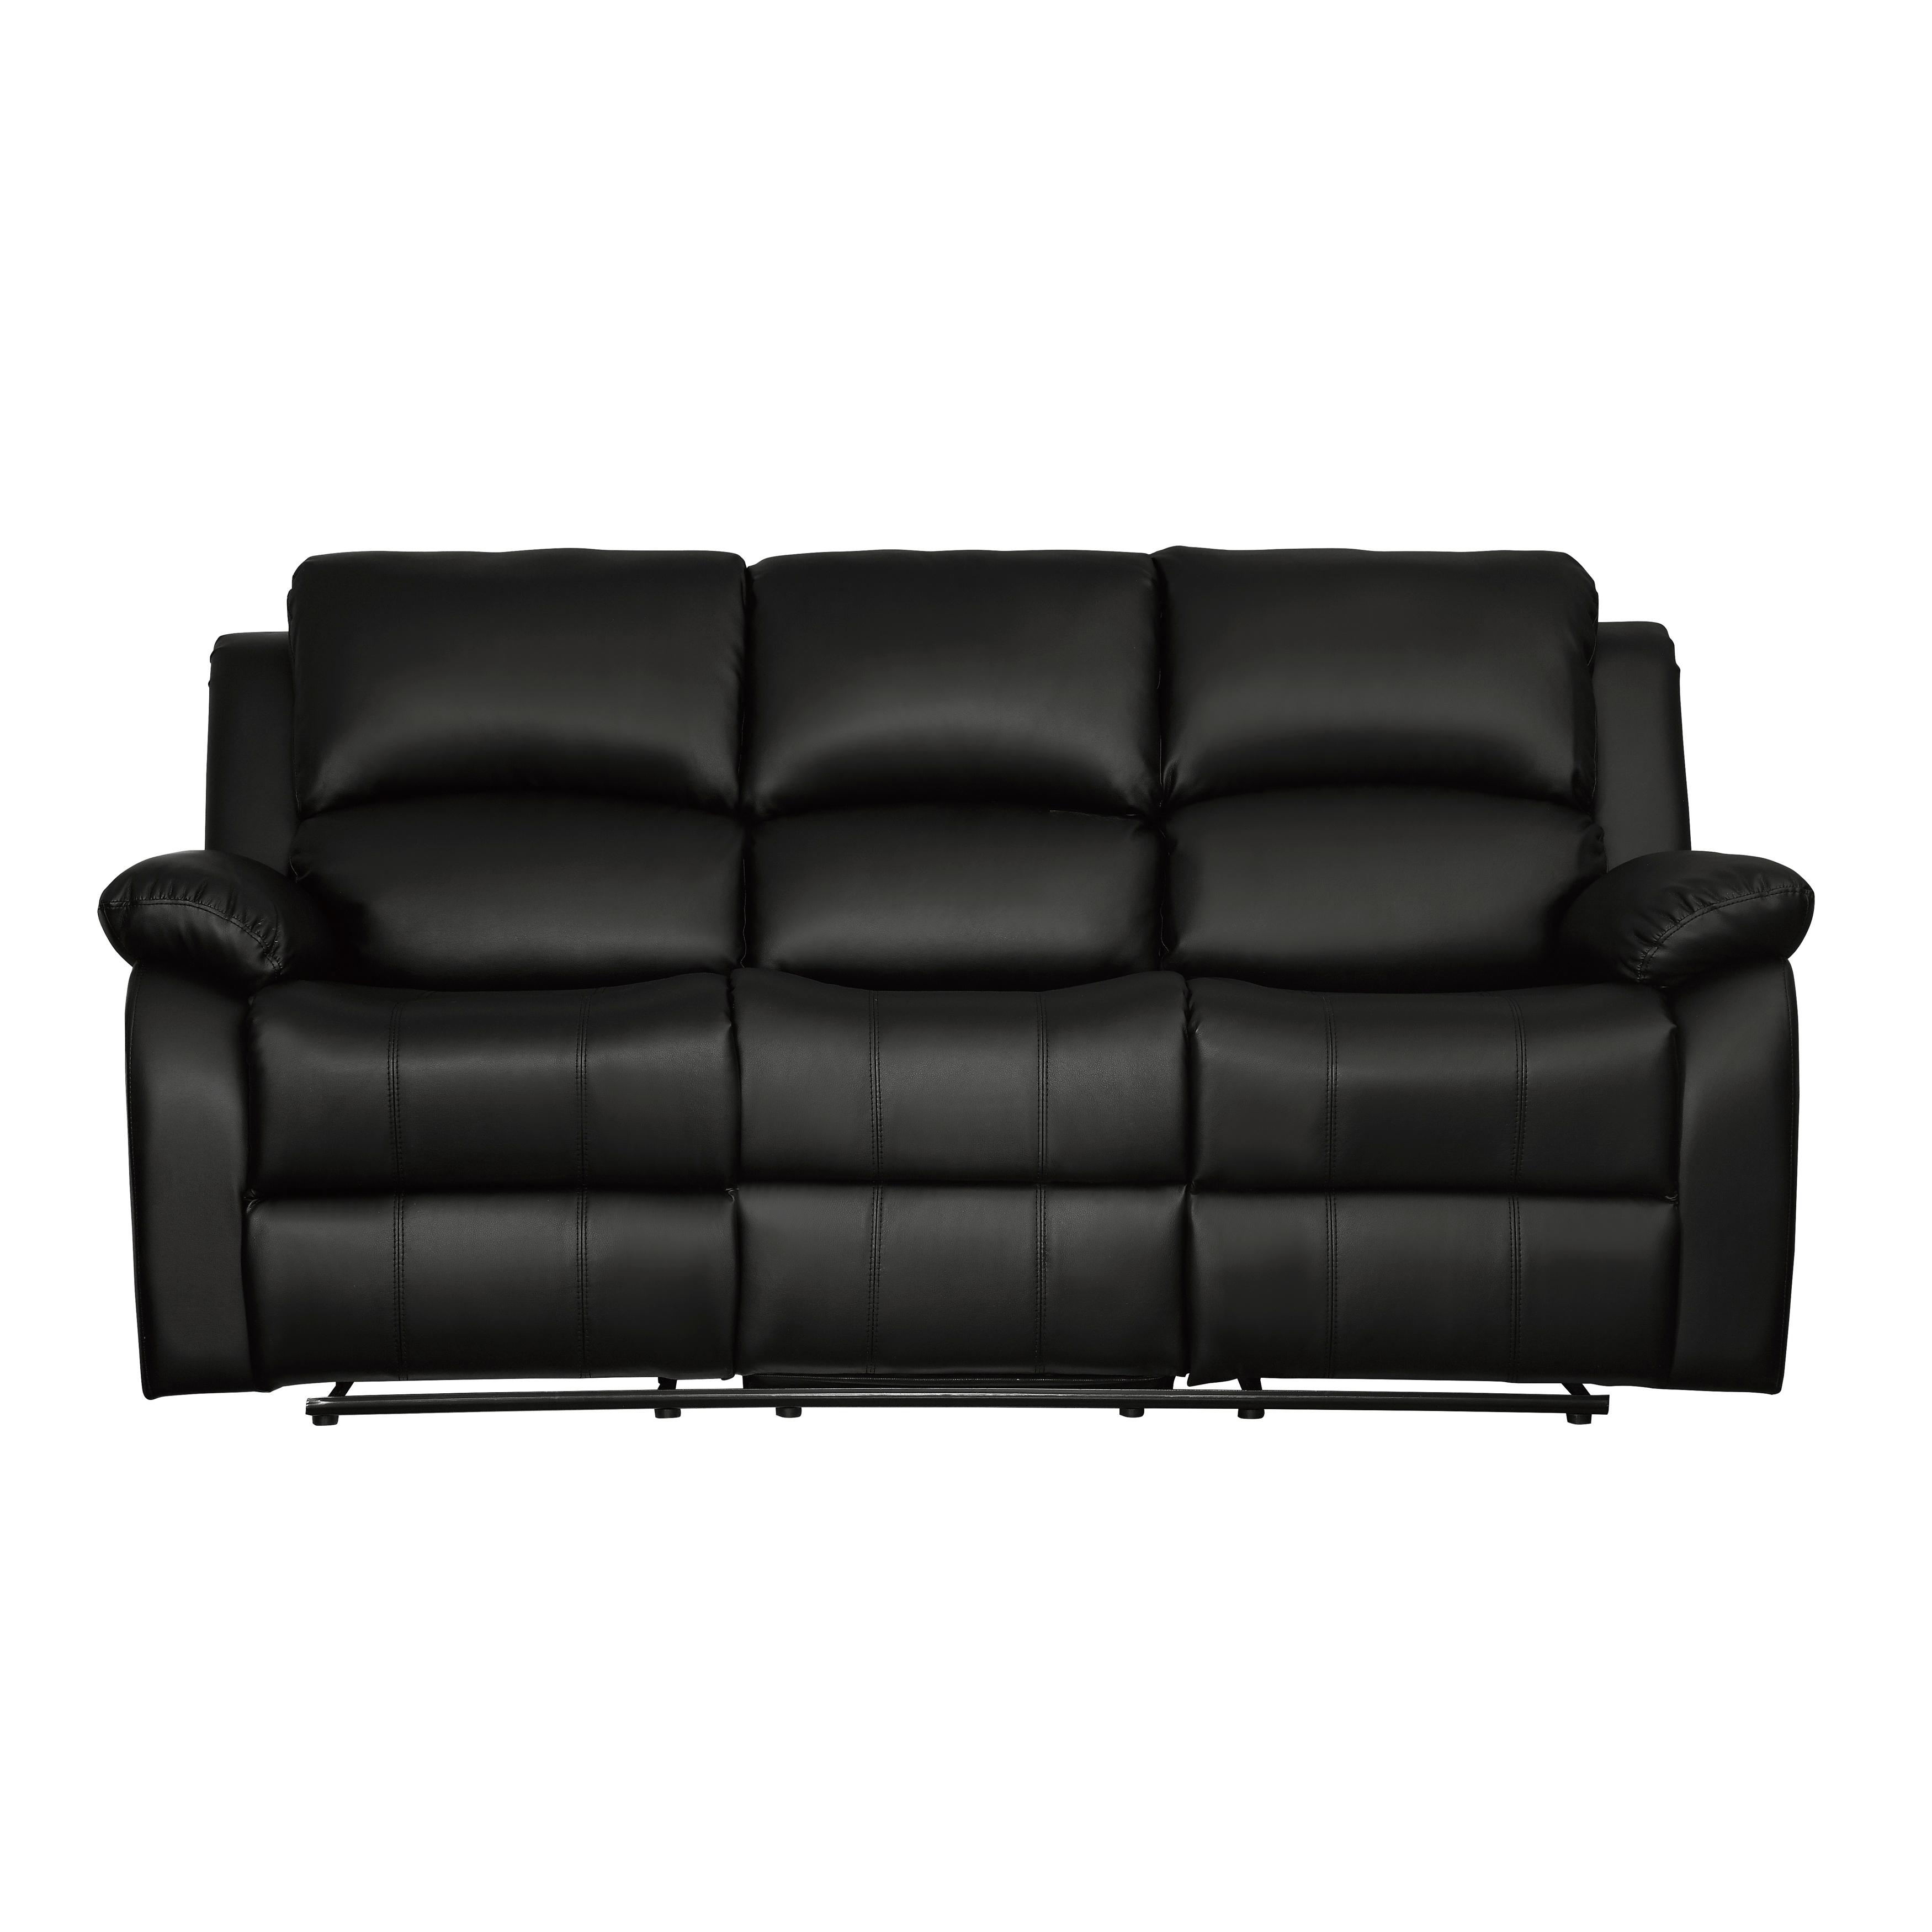 Transitional Reclining Sofa 9928BLK-3 Clarkdale 9928BLK-3 in Black Faux Leather